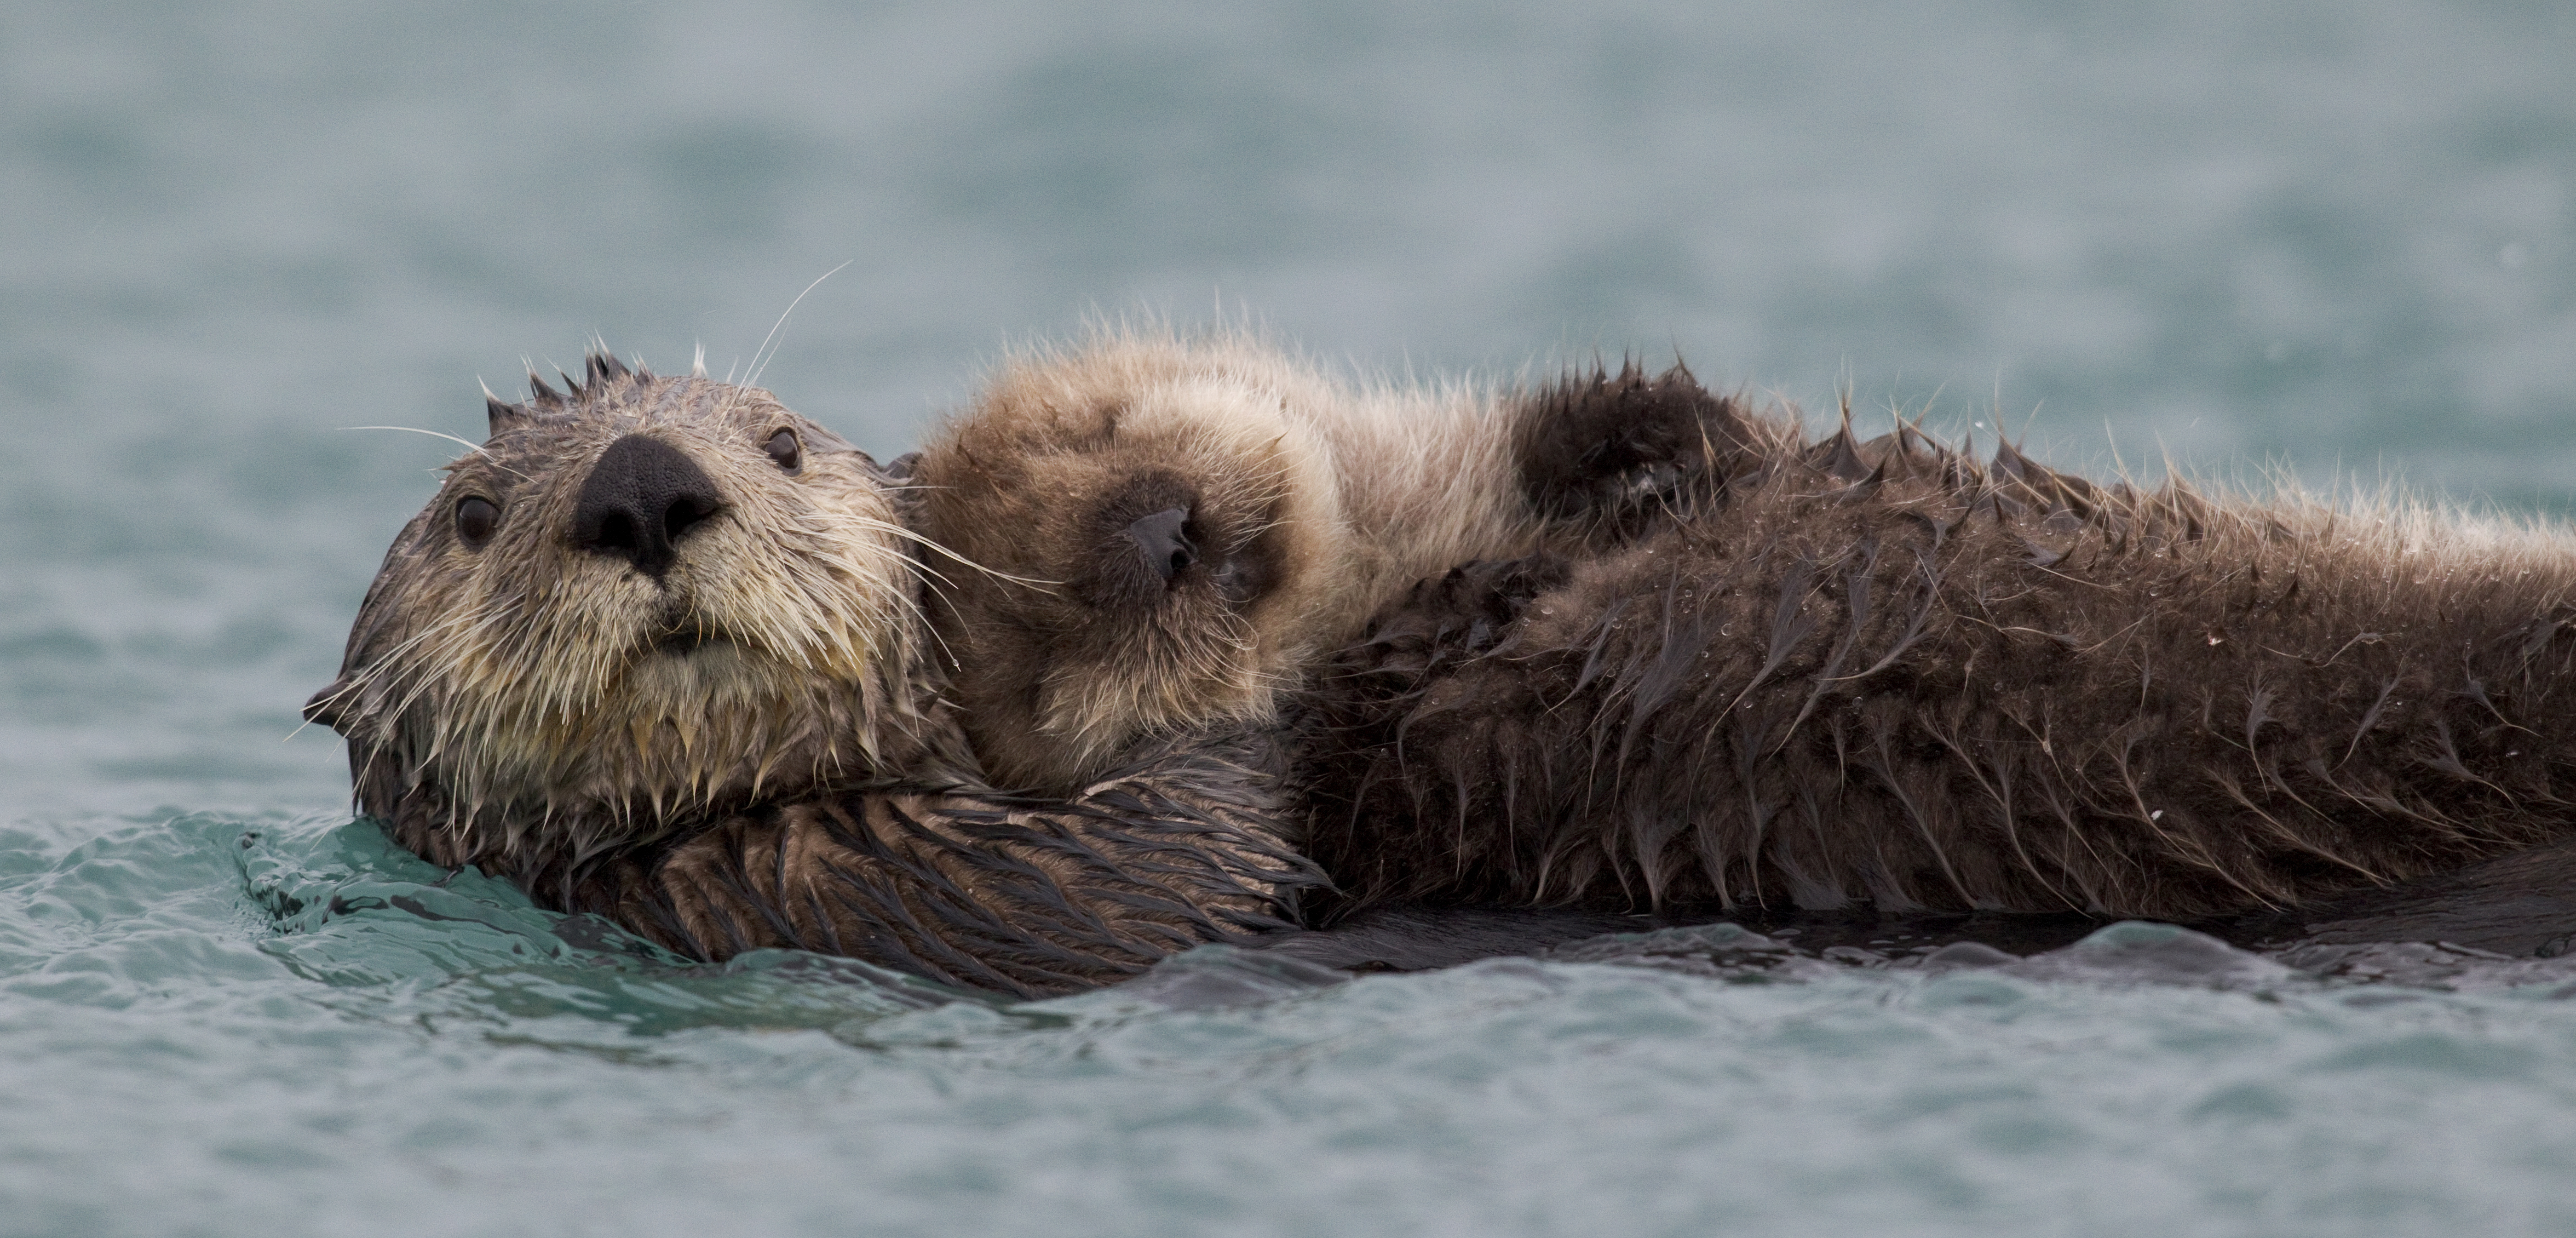 Sea otters are showing a range of symptoms, but nothing that can give away the culprit. Photo by Donald M. Jones/Minden Pictures/Corbis